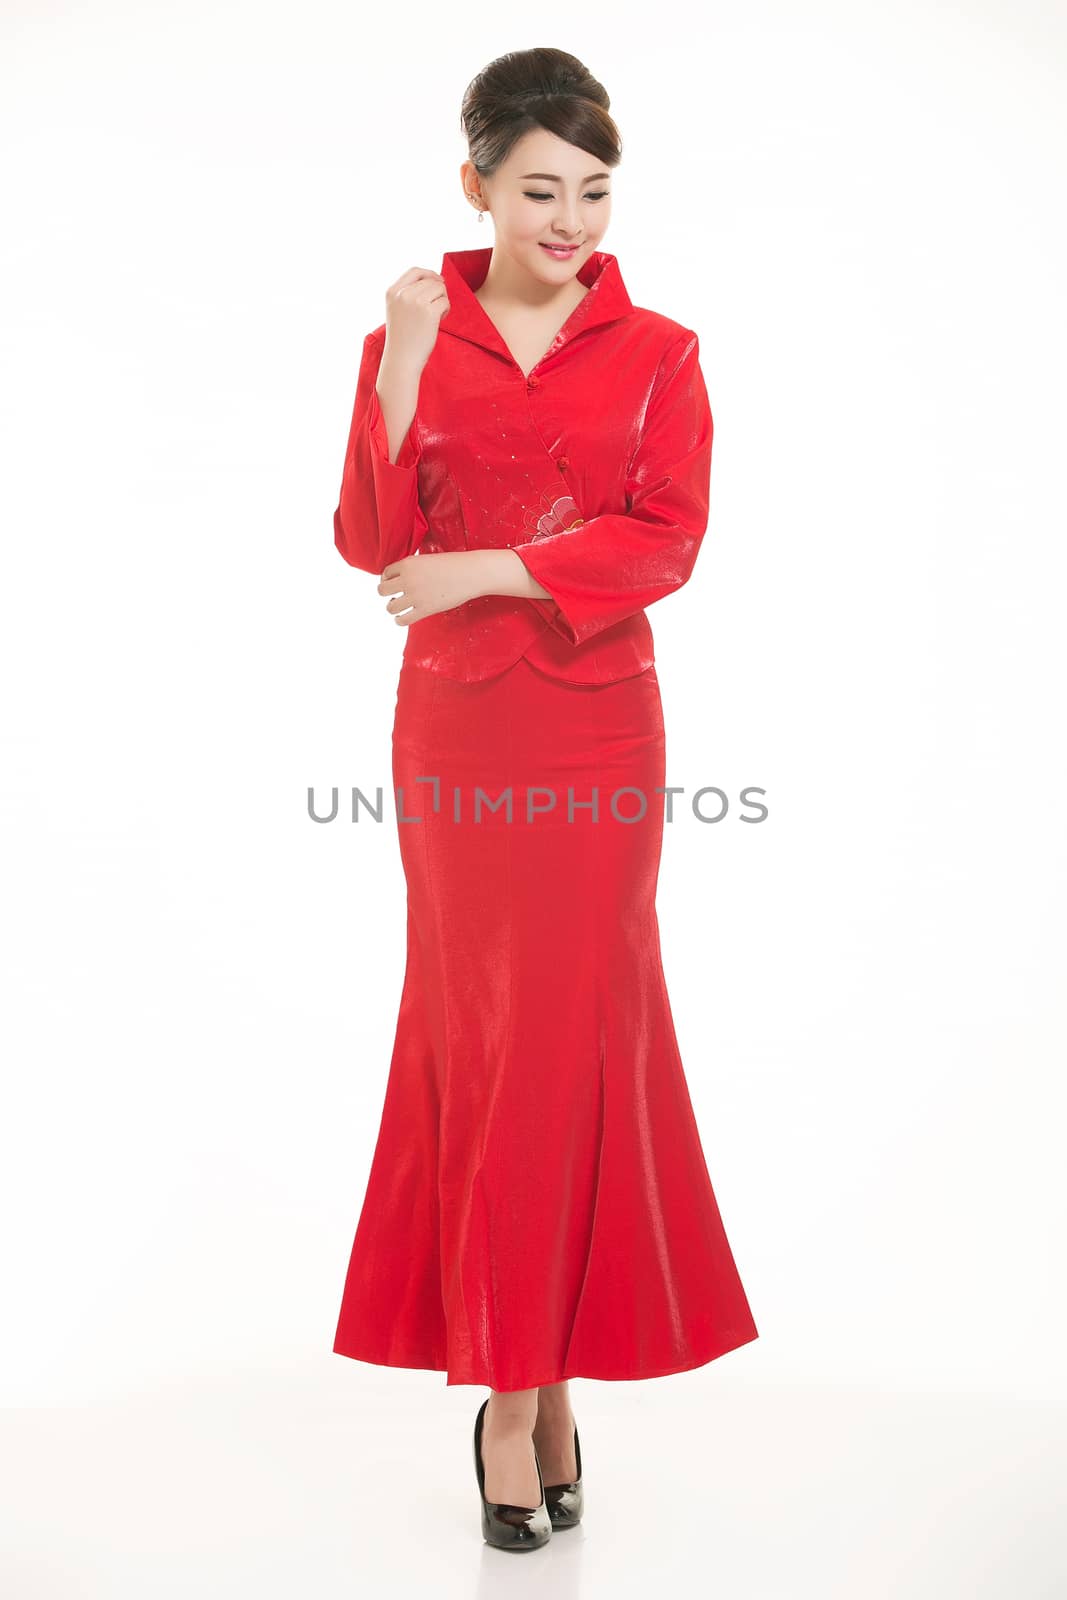 Wearing Chinese clothing waiter in front of a white background